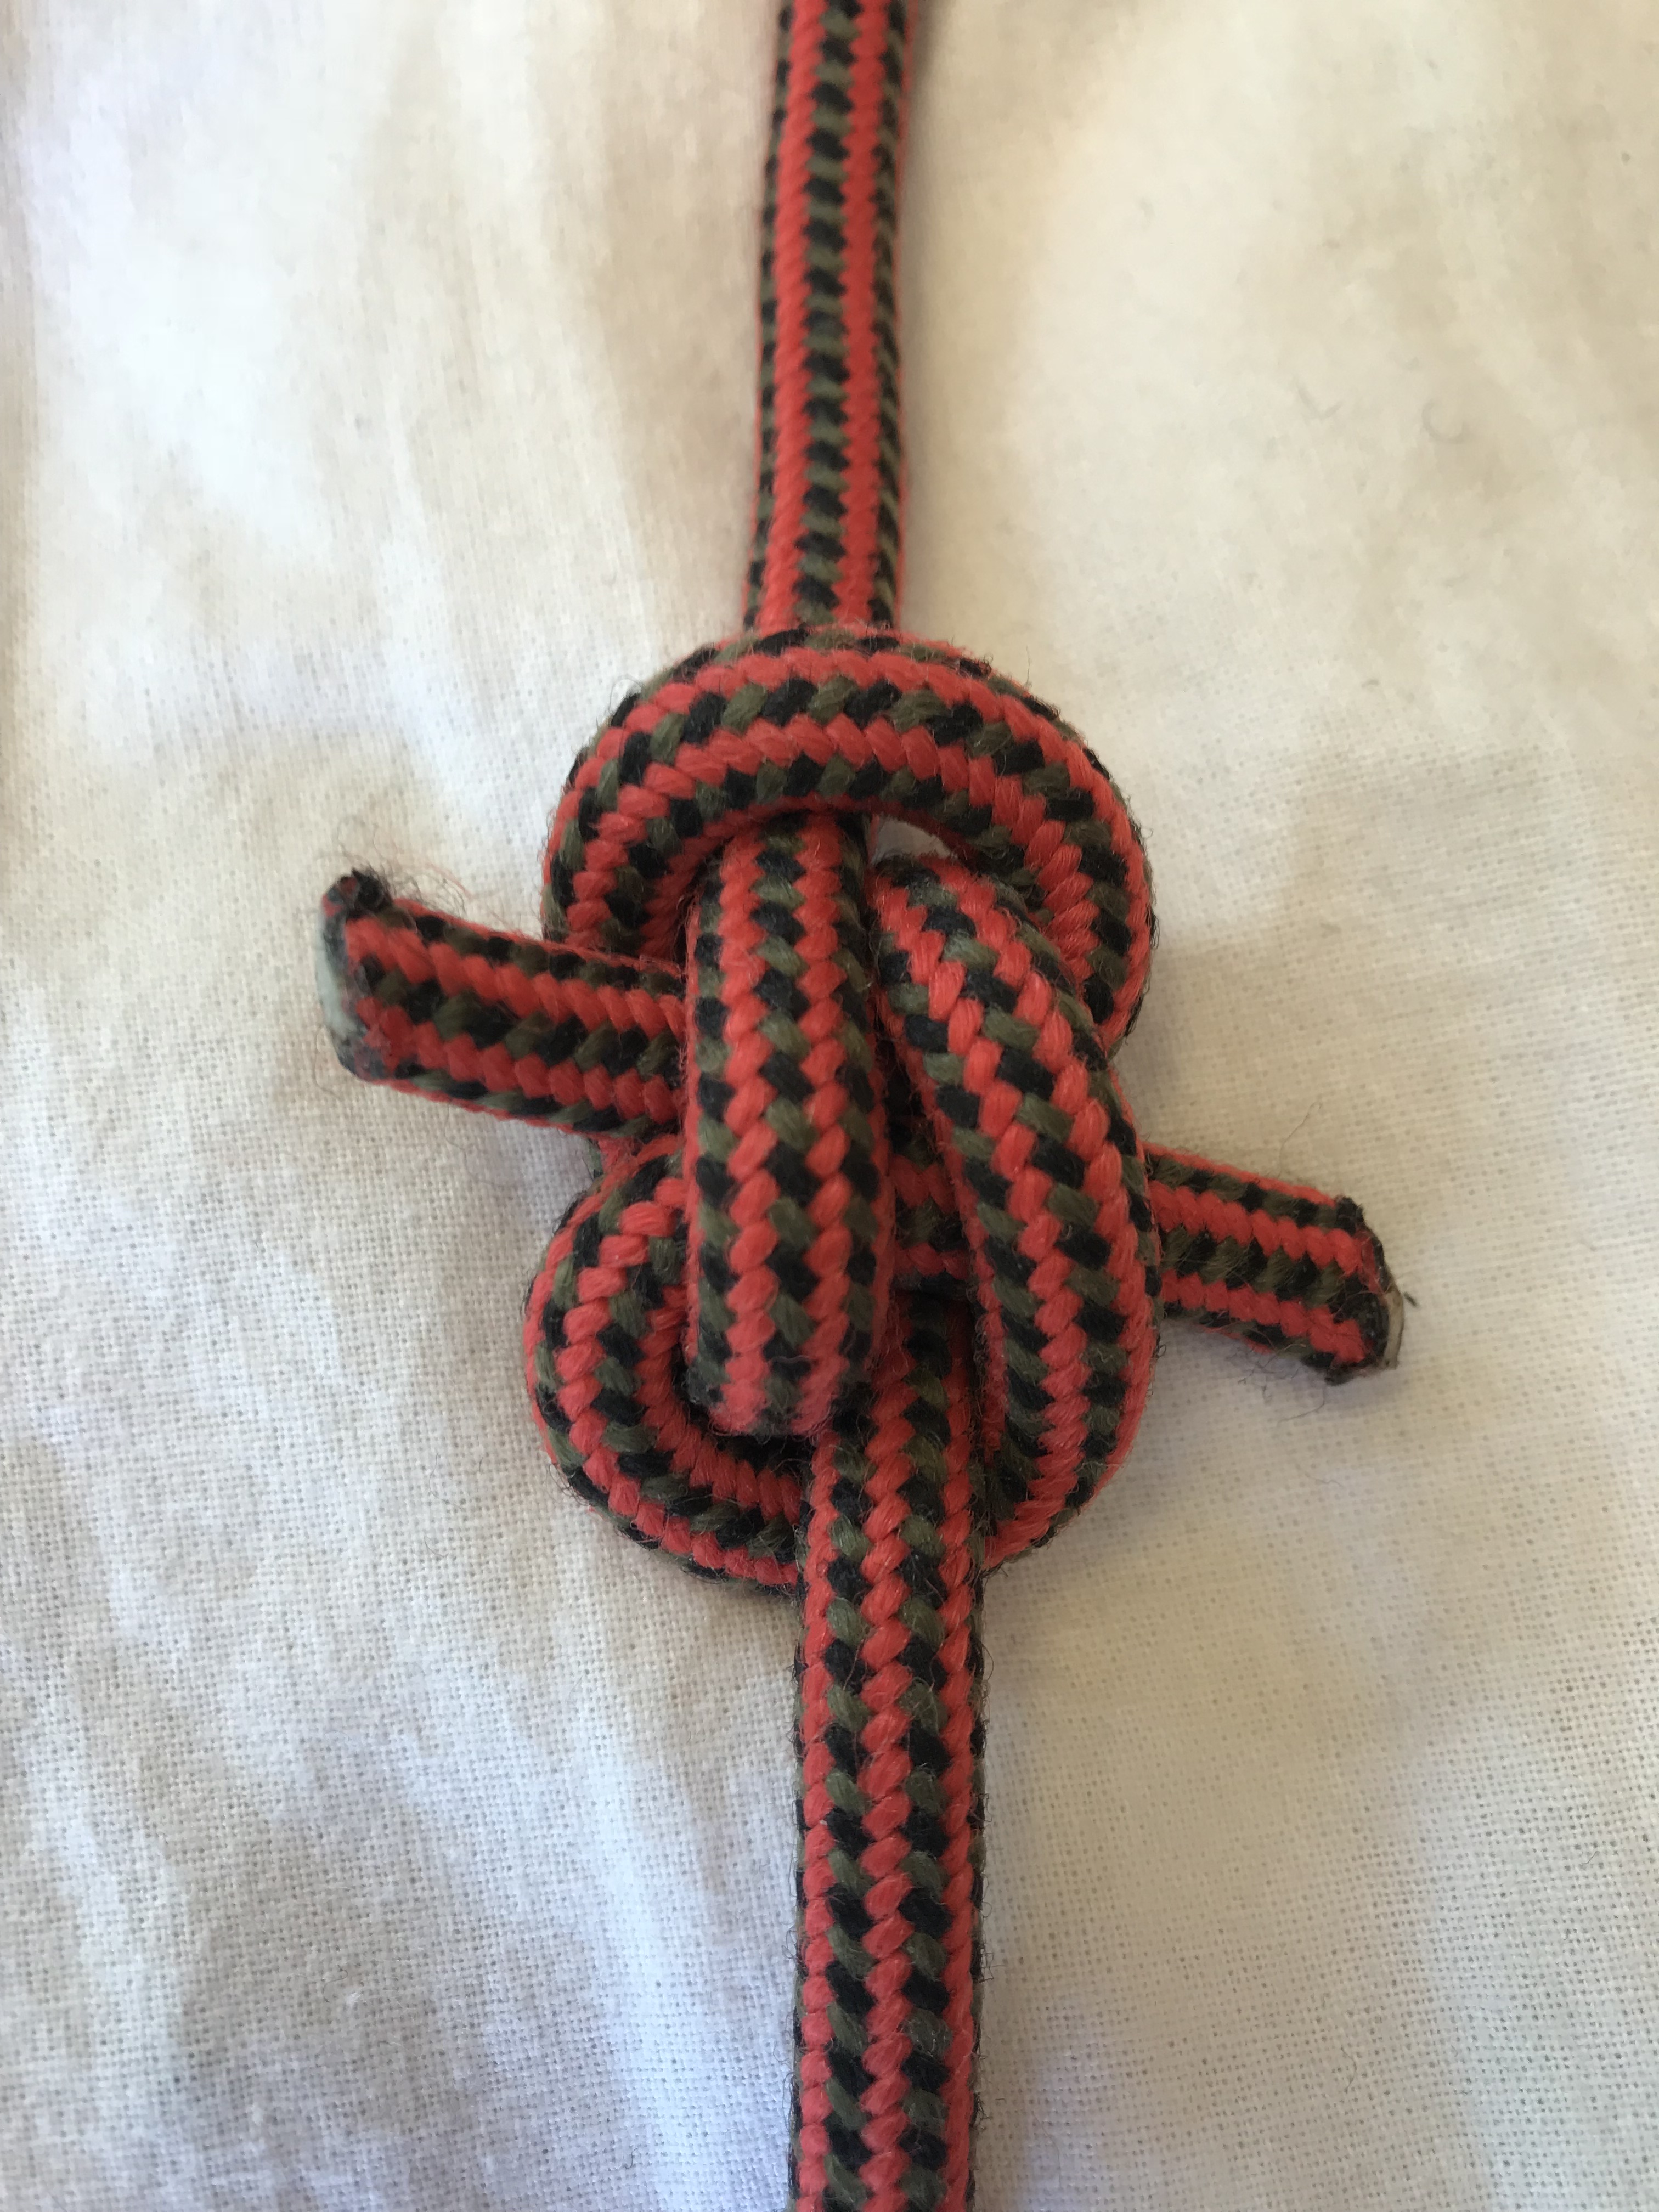 Simplest and therefore the slimmest version of a Zeppelin knot